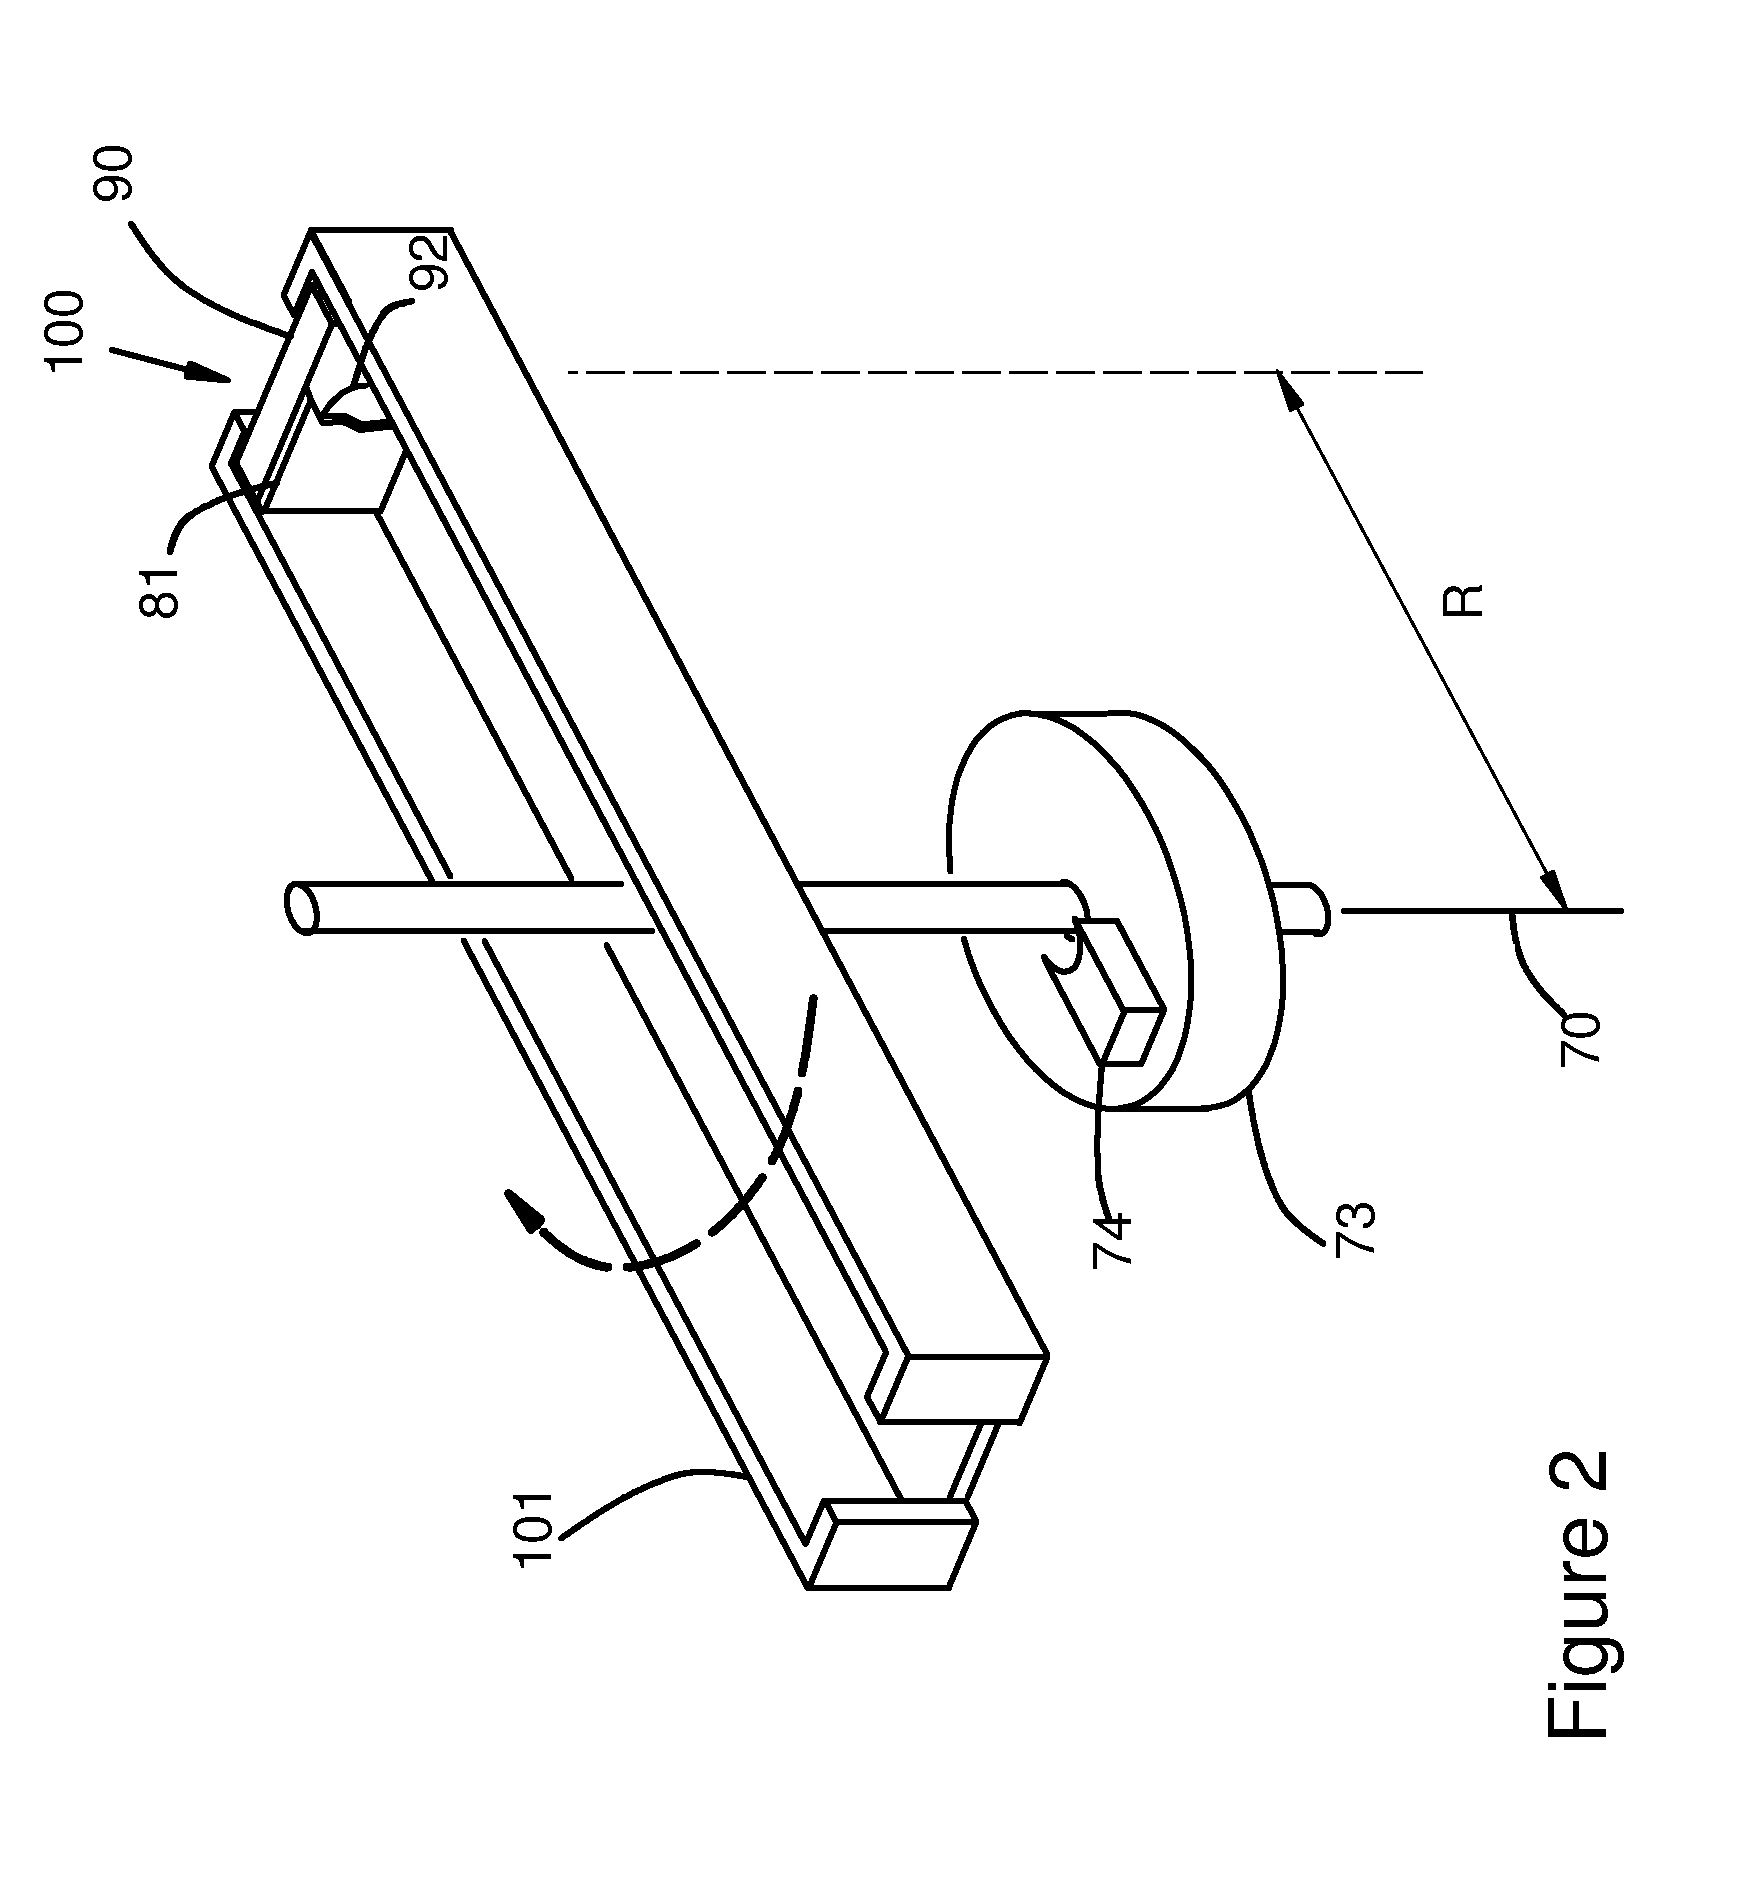 Device and method to measure bulk unconfined yield strength of powders using minimal material